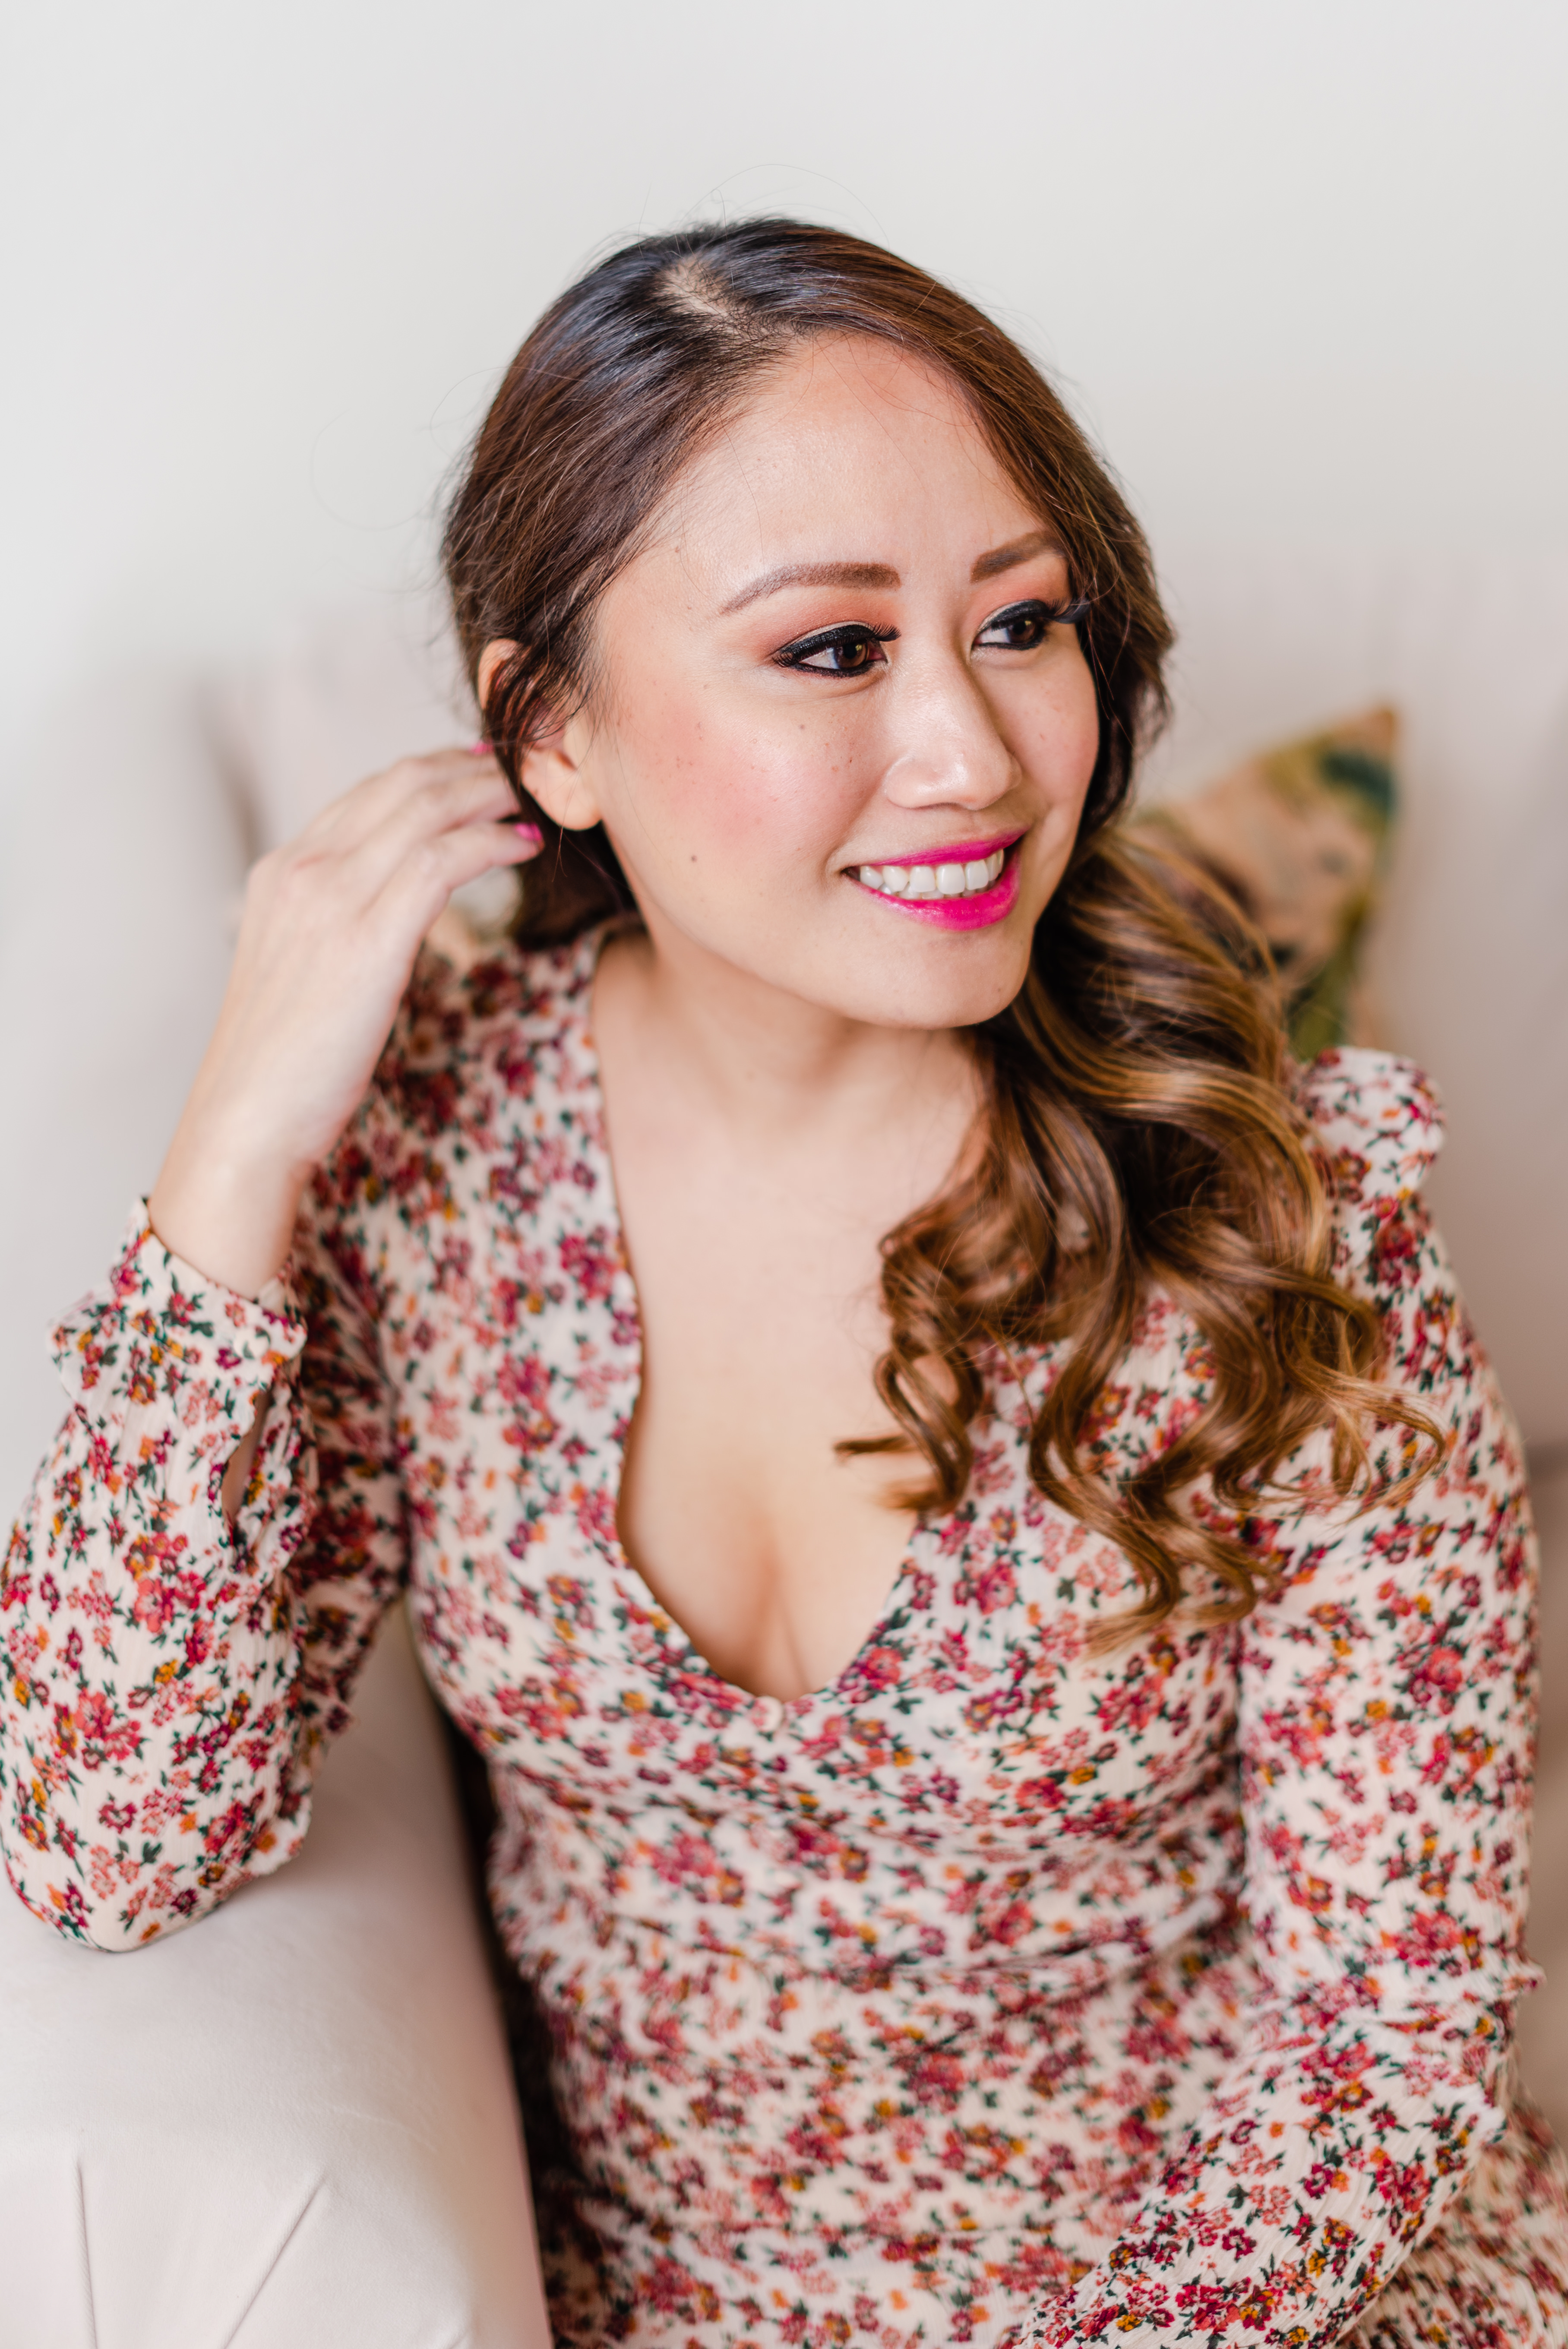 5 WAYS TO BUILD SELF-CONFIDENCE | Viennelyn Copero, Fashion, Lifestyle, and Travel Blogger